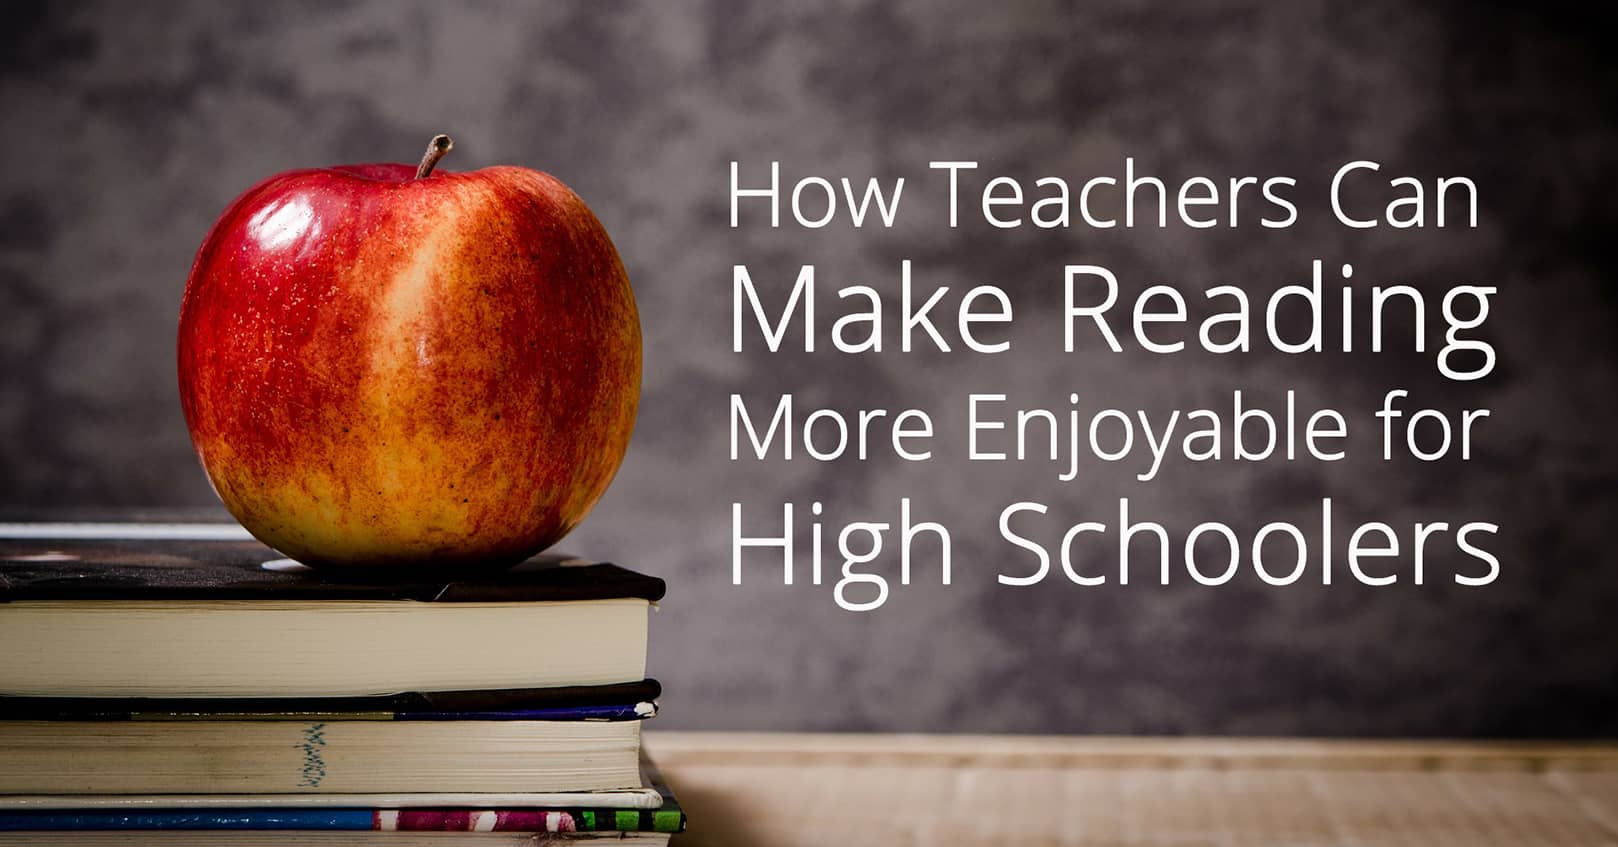 How Teachers Can Make Reading More Enjoyable for High Schoolers